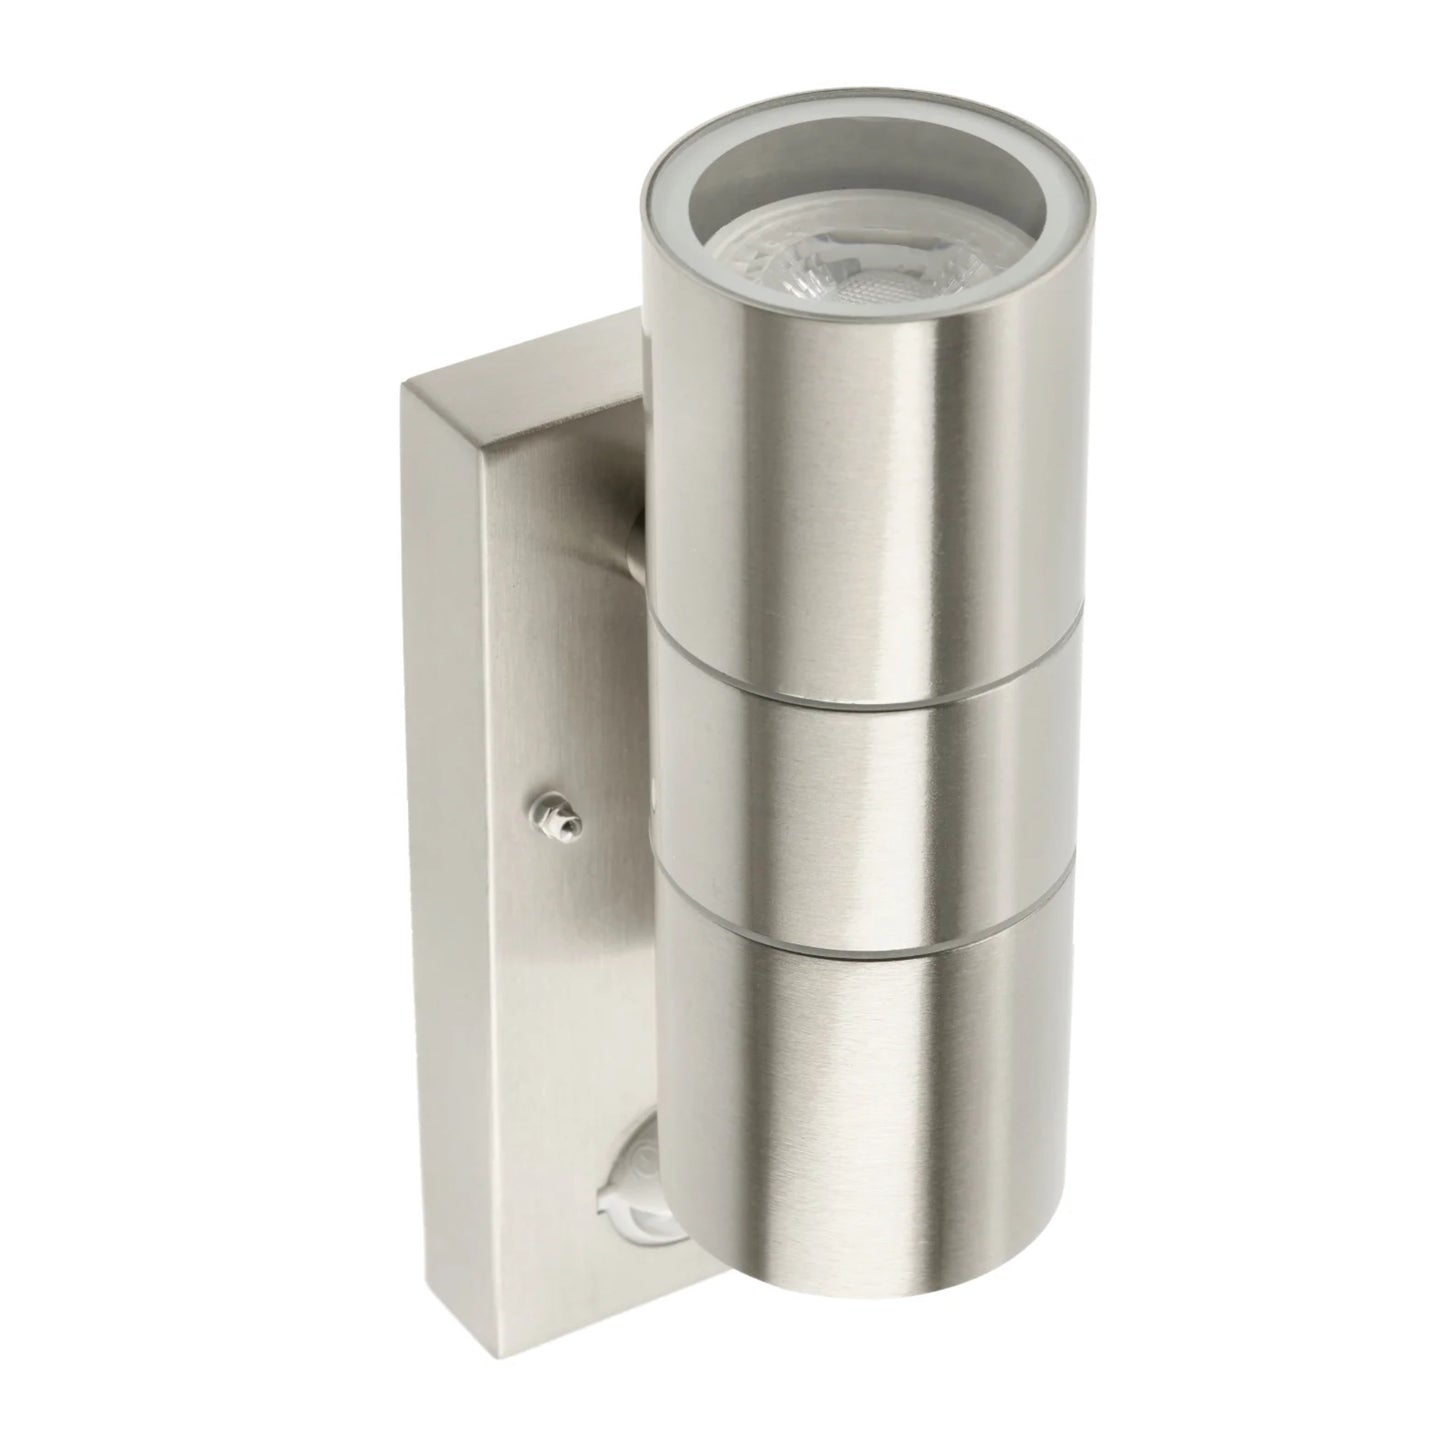 Our Alesha outdoor up and down light is modern and stylish in its appearance.  It comes in a cylinder design mounted on a rectangle back plate complete with clear glass diffusers and built in PIR motion sensor. It is designed for durability and longevity with its robust material producing a fully weatherproof and water resistant light fitting